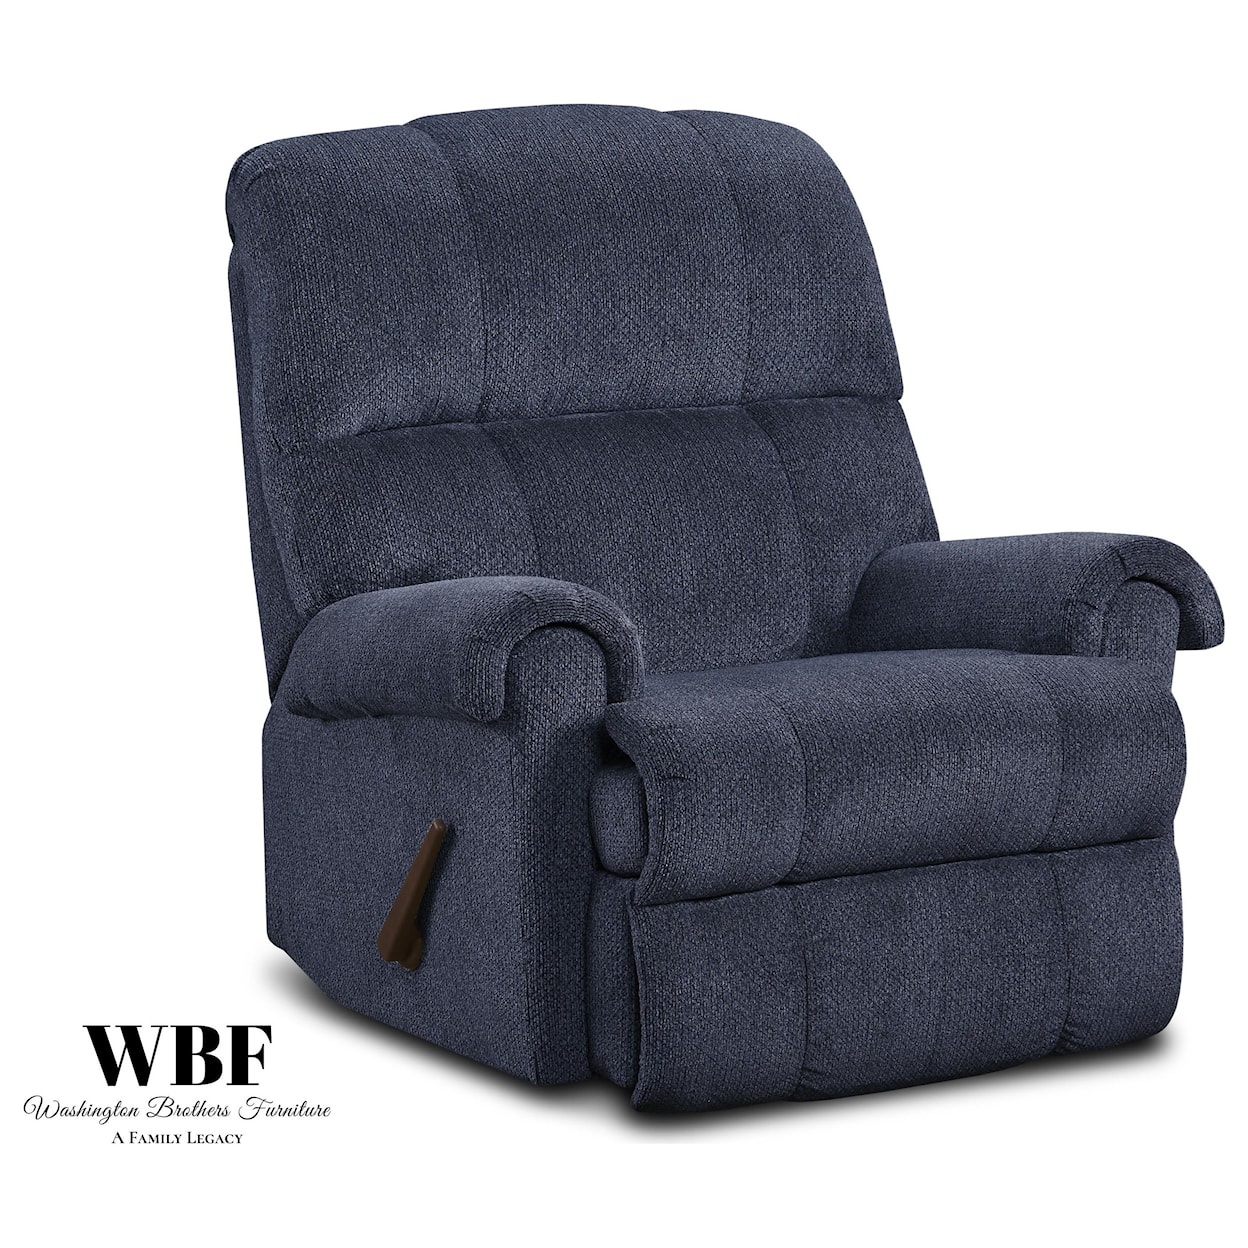 Washington Brothers Furniture 9010 Recliners Recliner